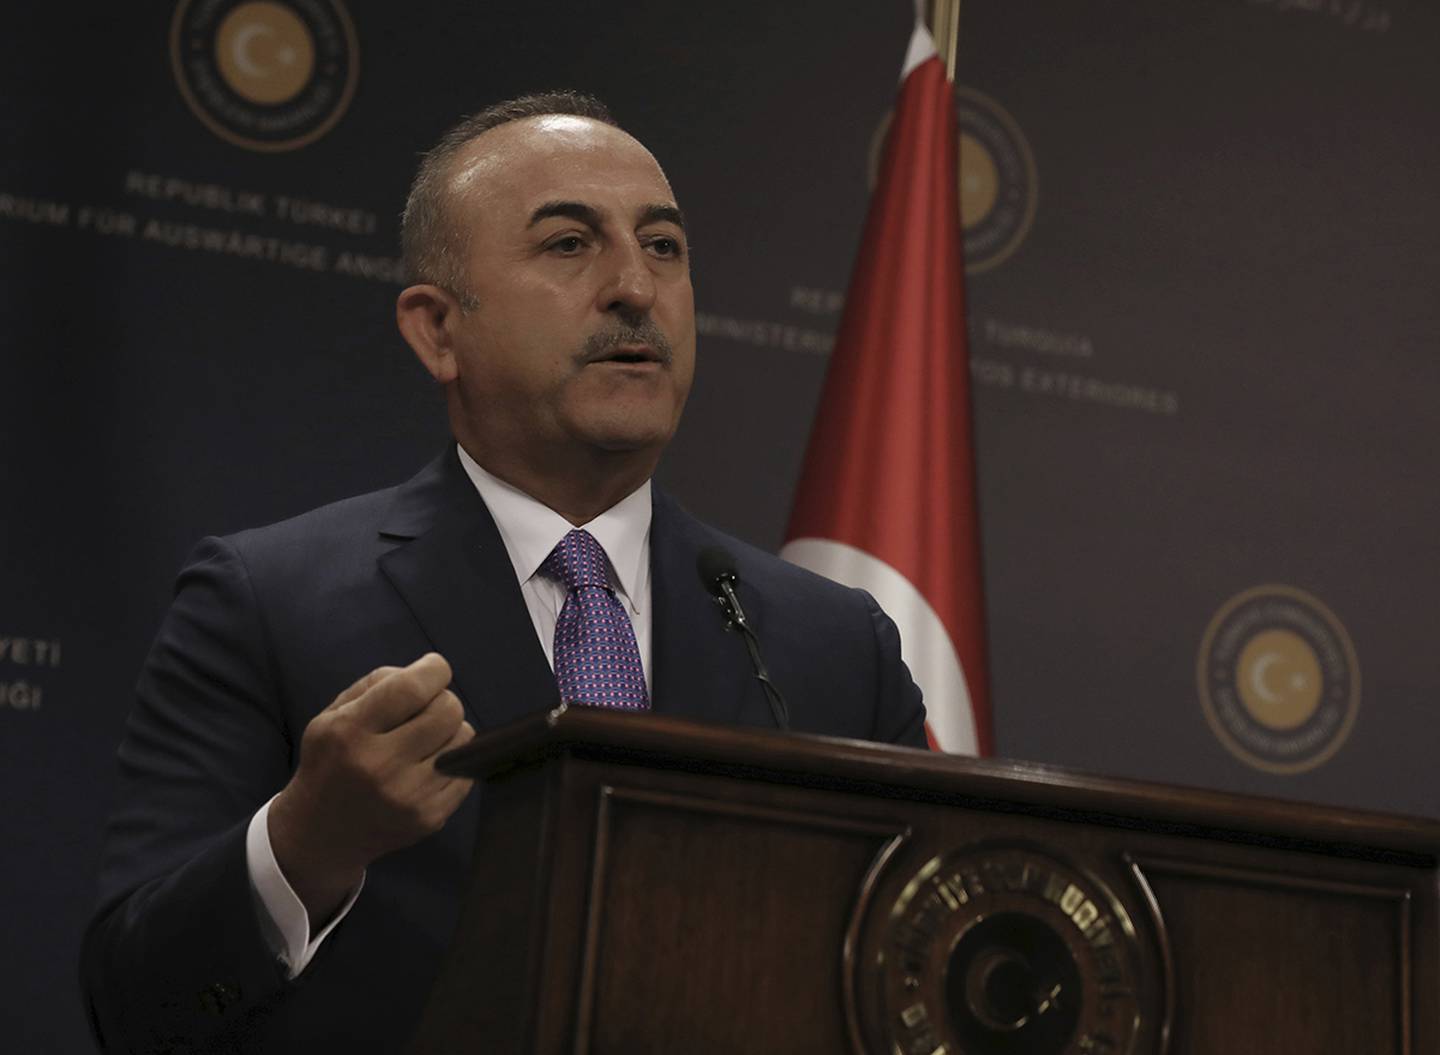 Turkey's Foreign Minister Mevlut Cavugoglu speaks during a news conference in Ankara, Turkey, Wednesday, July 24, 2019.